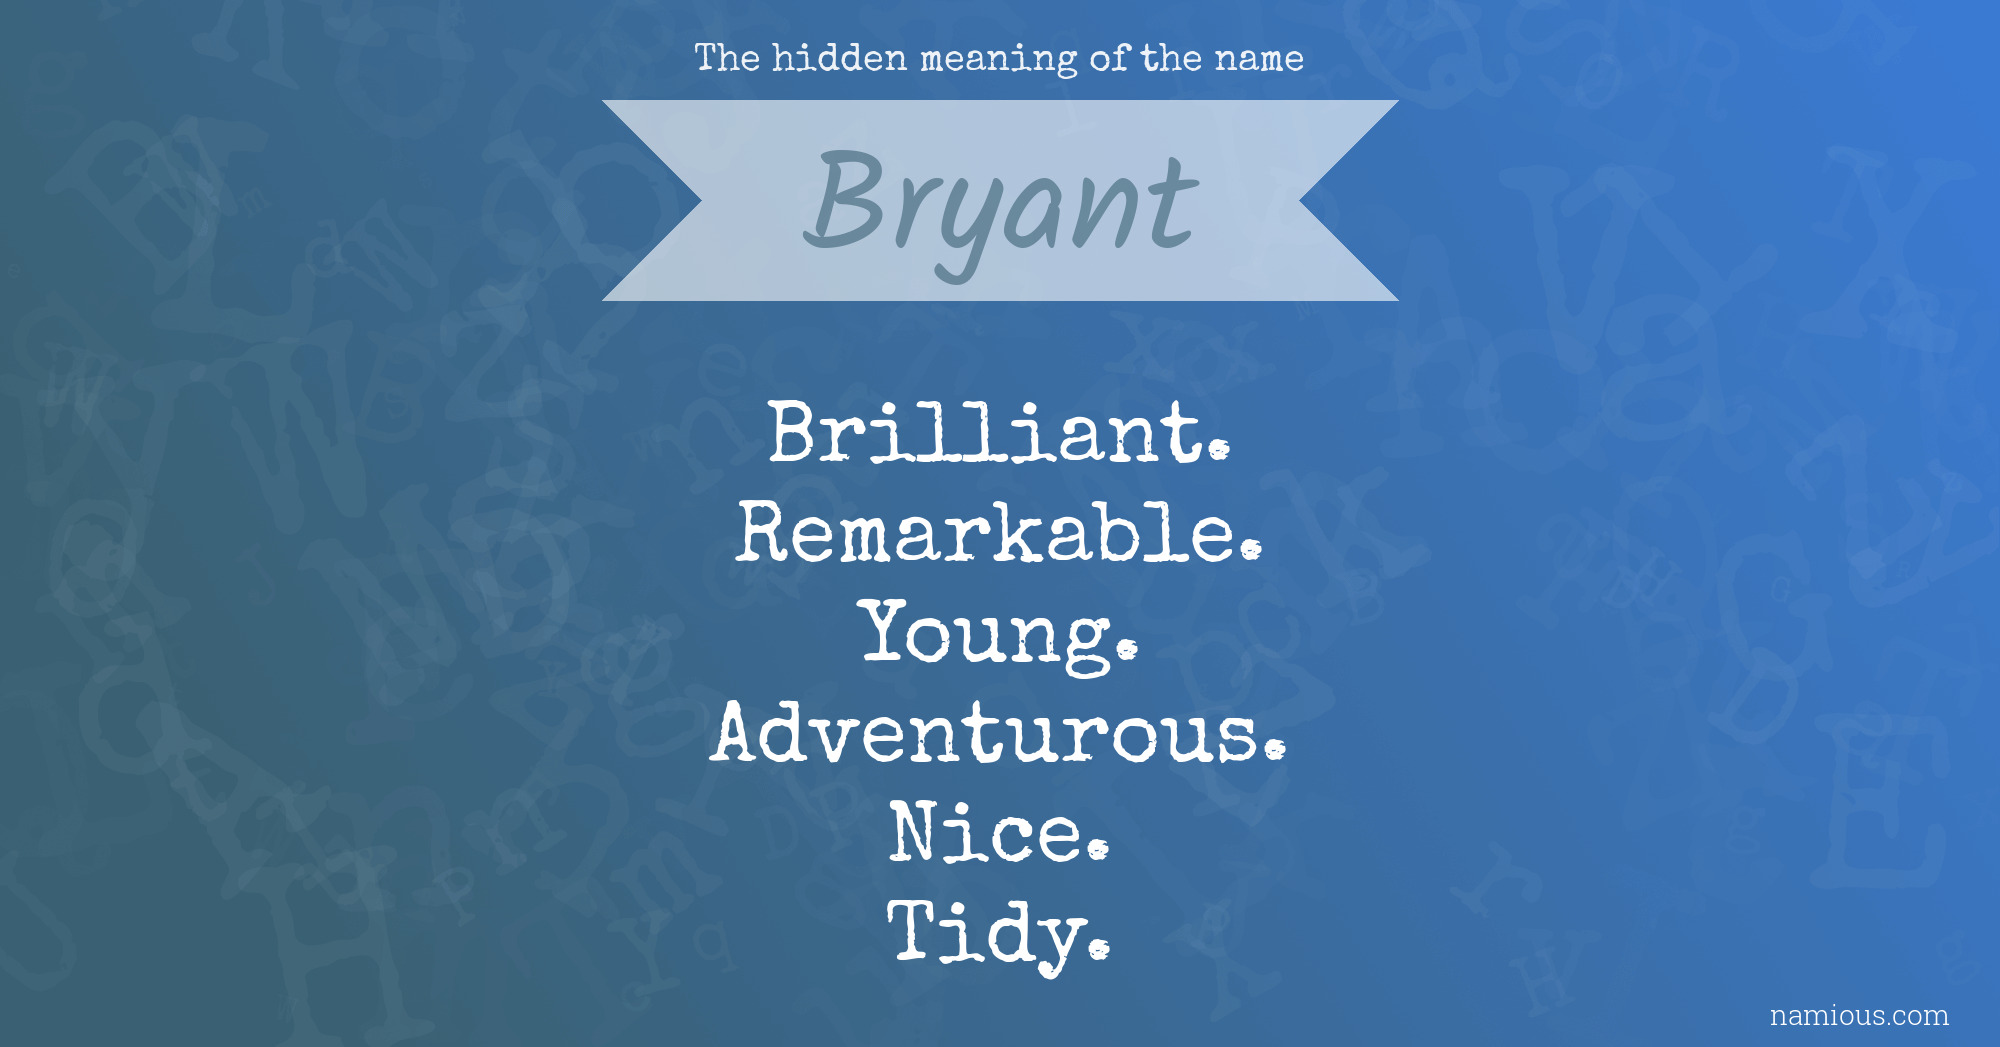 The hidden meaning of the name Bryant